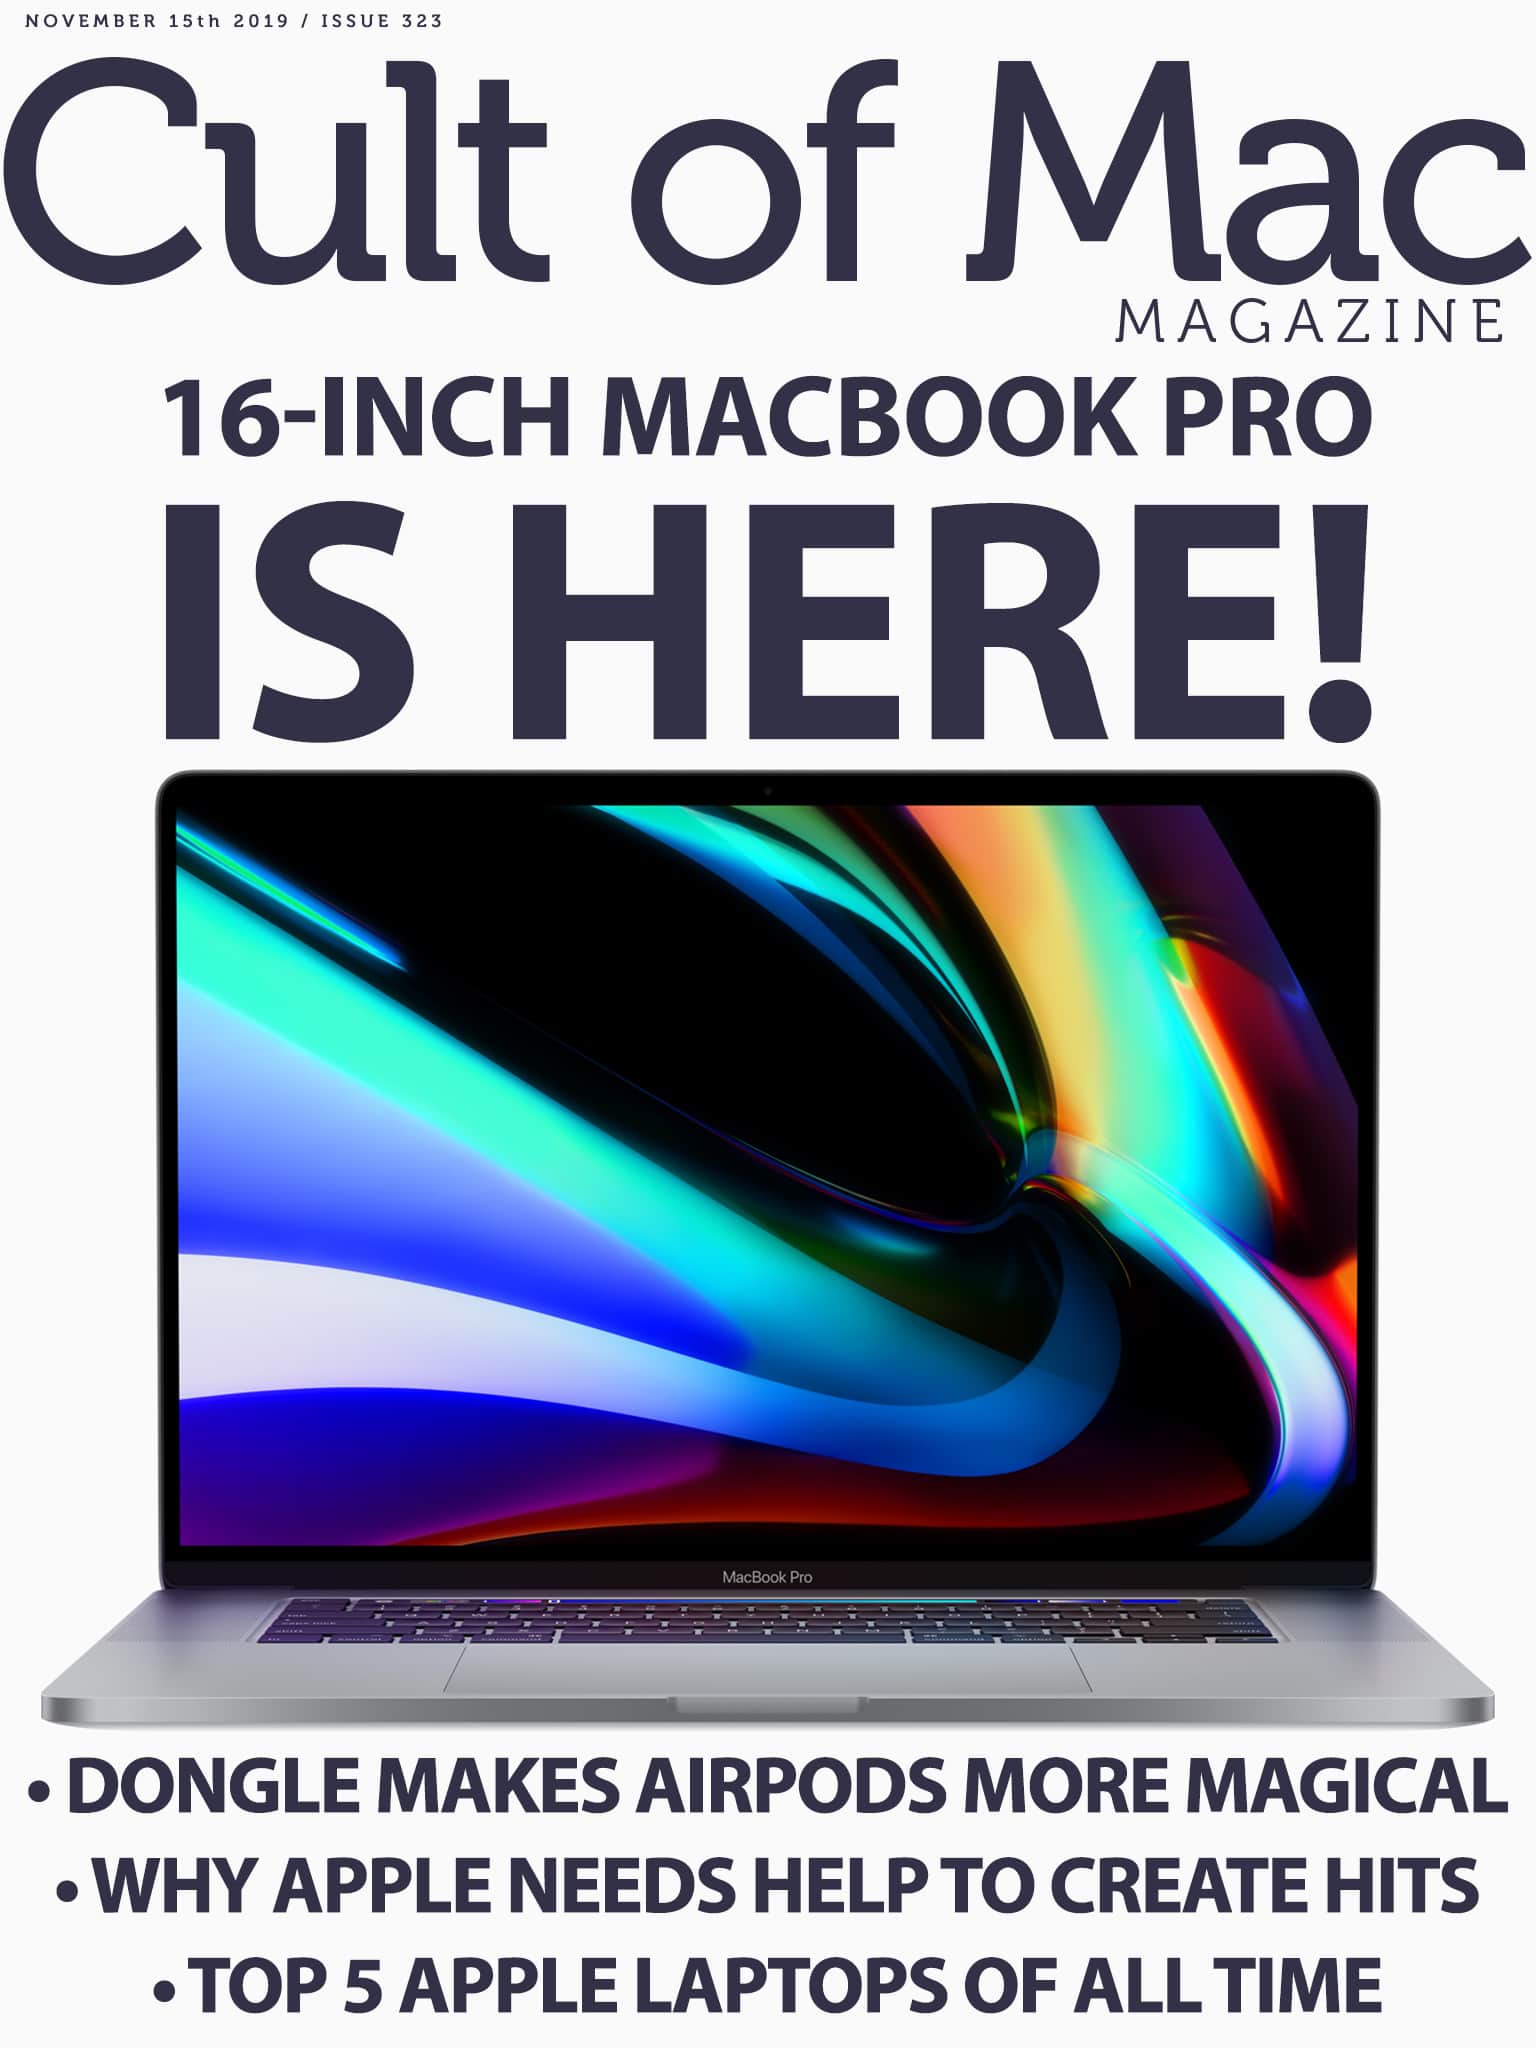 We've been waiting. And waiting. And waiting. Now the 16-inch MacBook Pro is here!